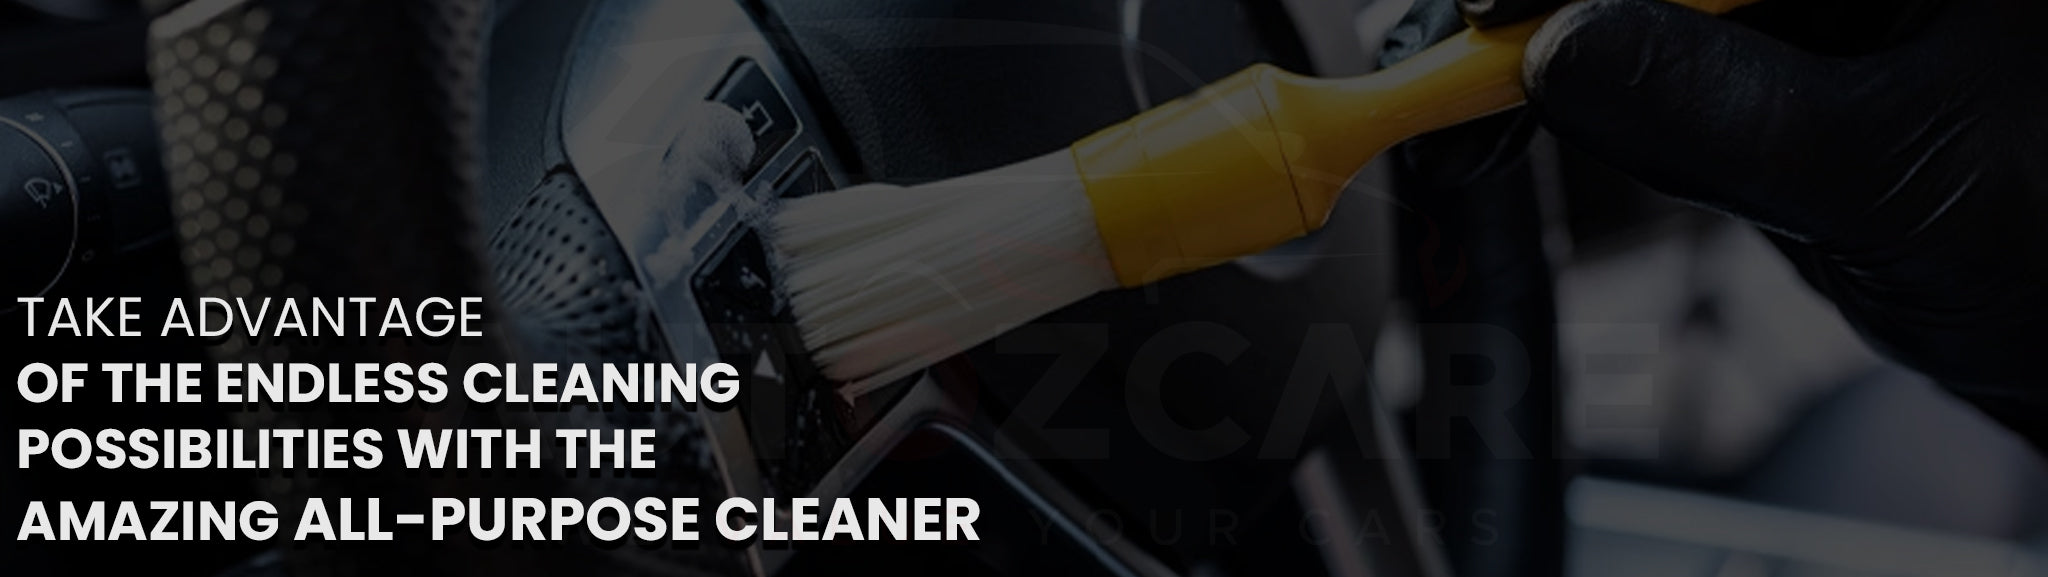 Take advantage of the endless cleaning possibilities with the amazing all-purpose cleaner